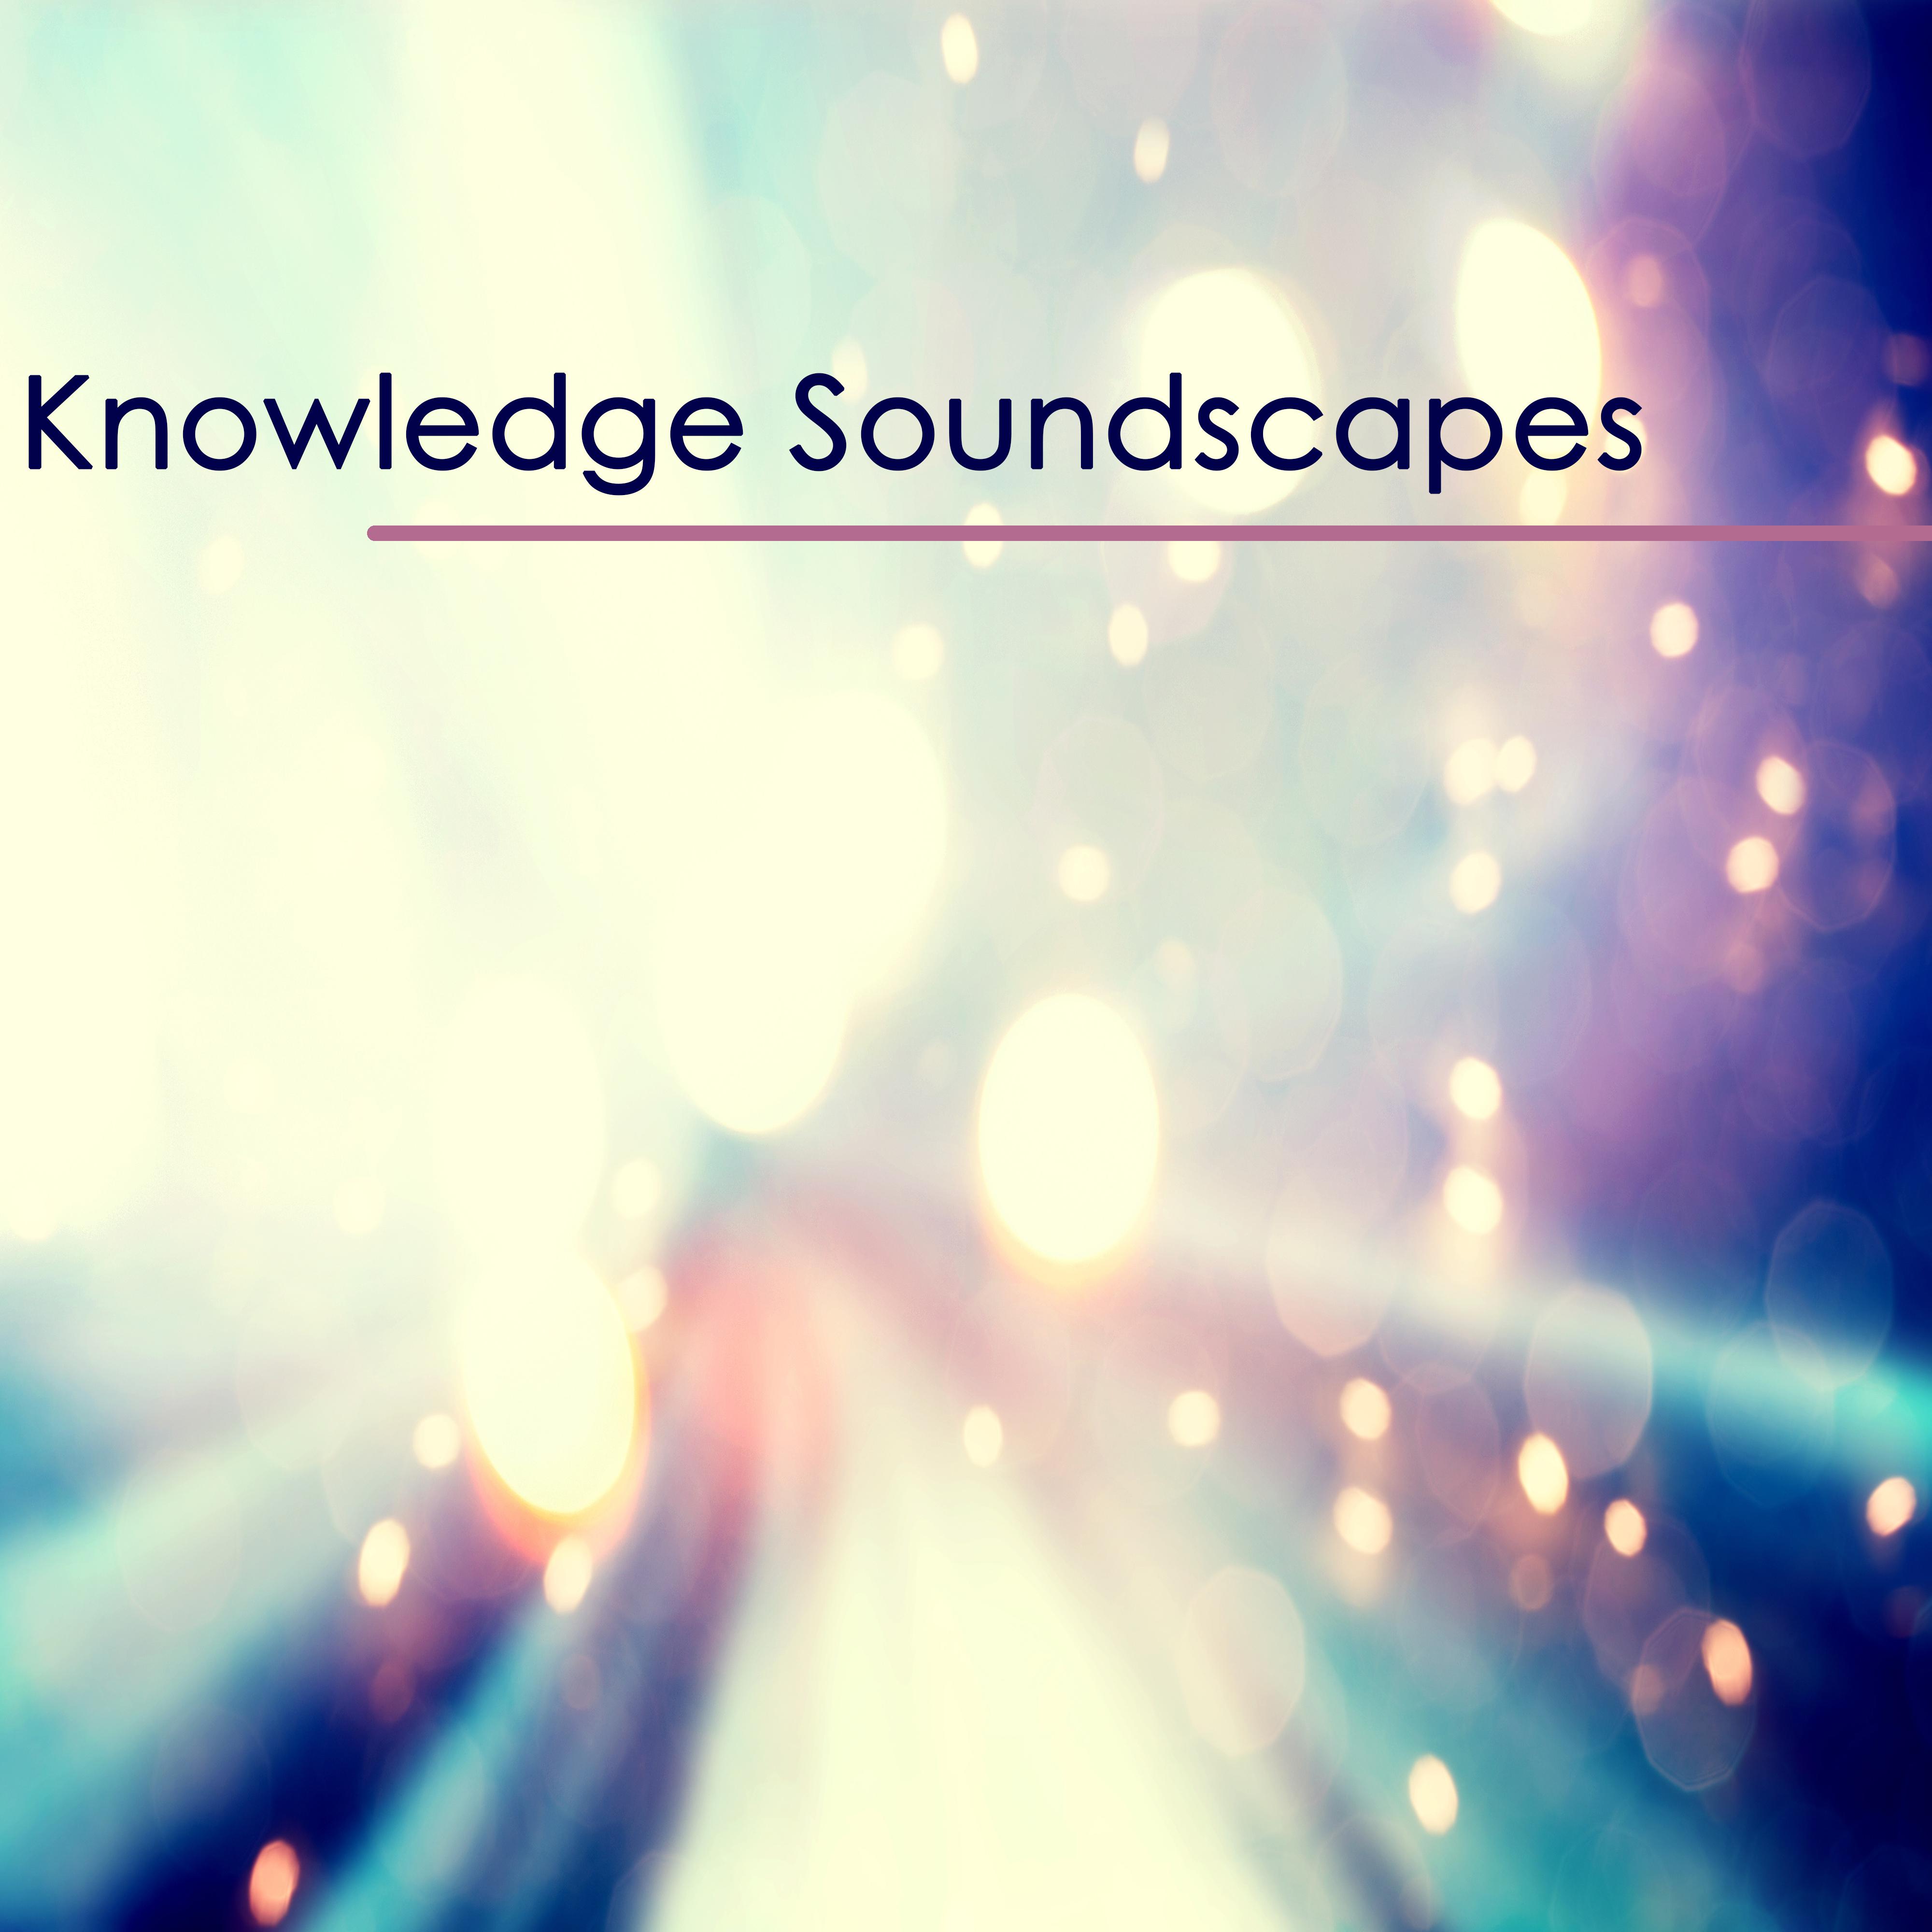 Knowledge Soundscapes – Sound Therapy Study Music to Improve Concentration and Mind Power